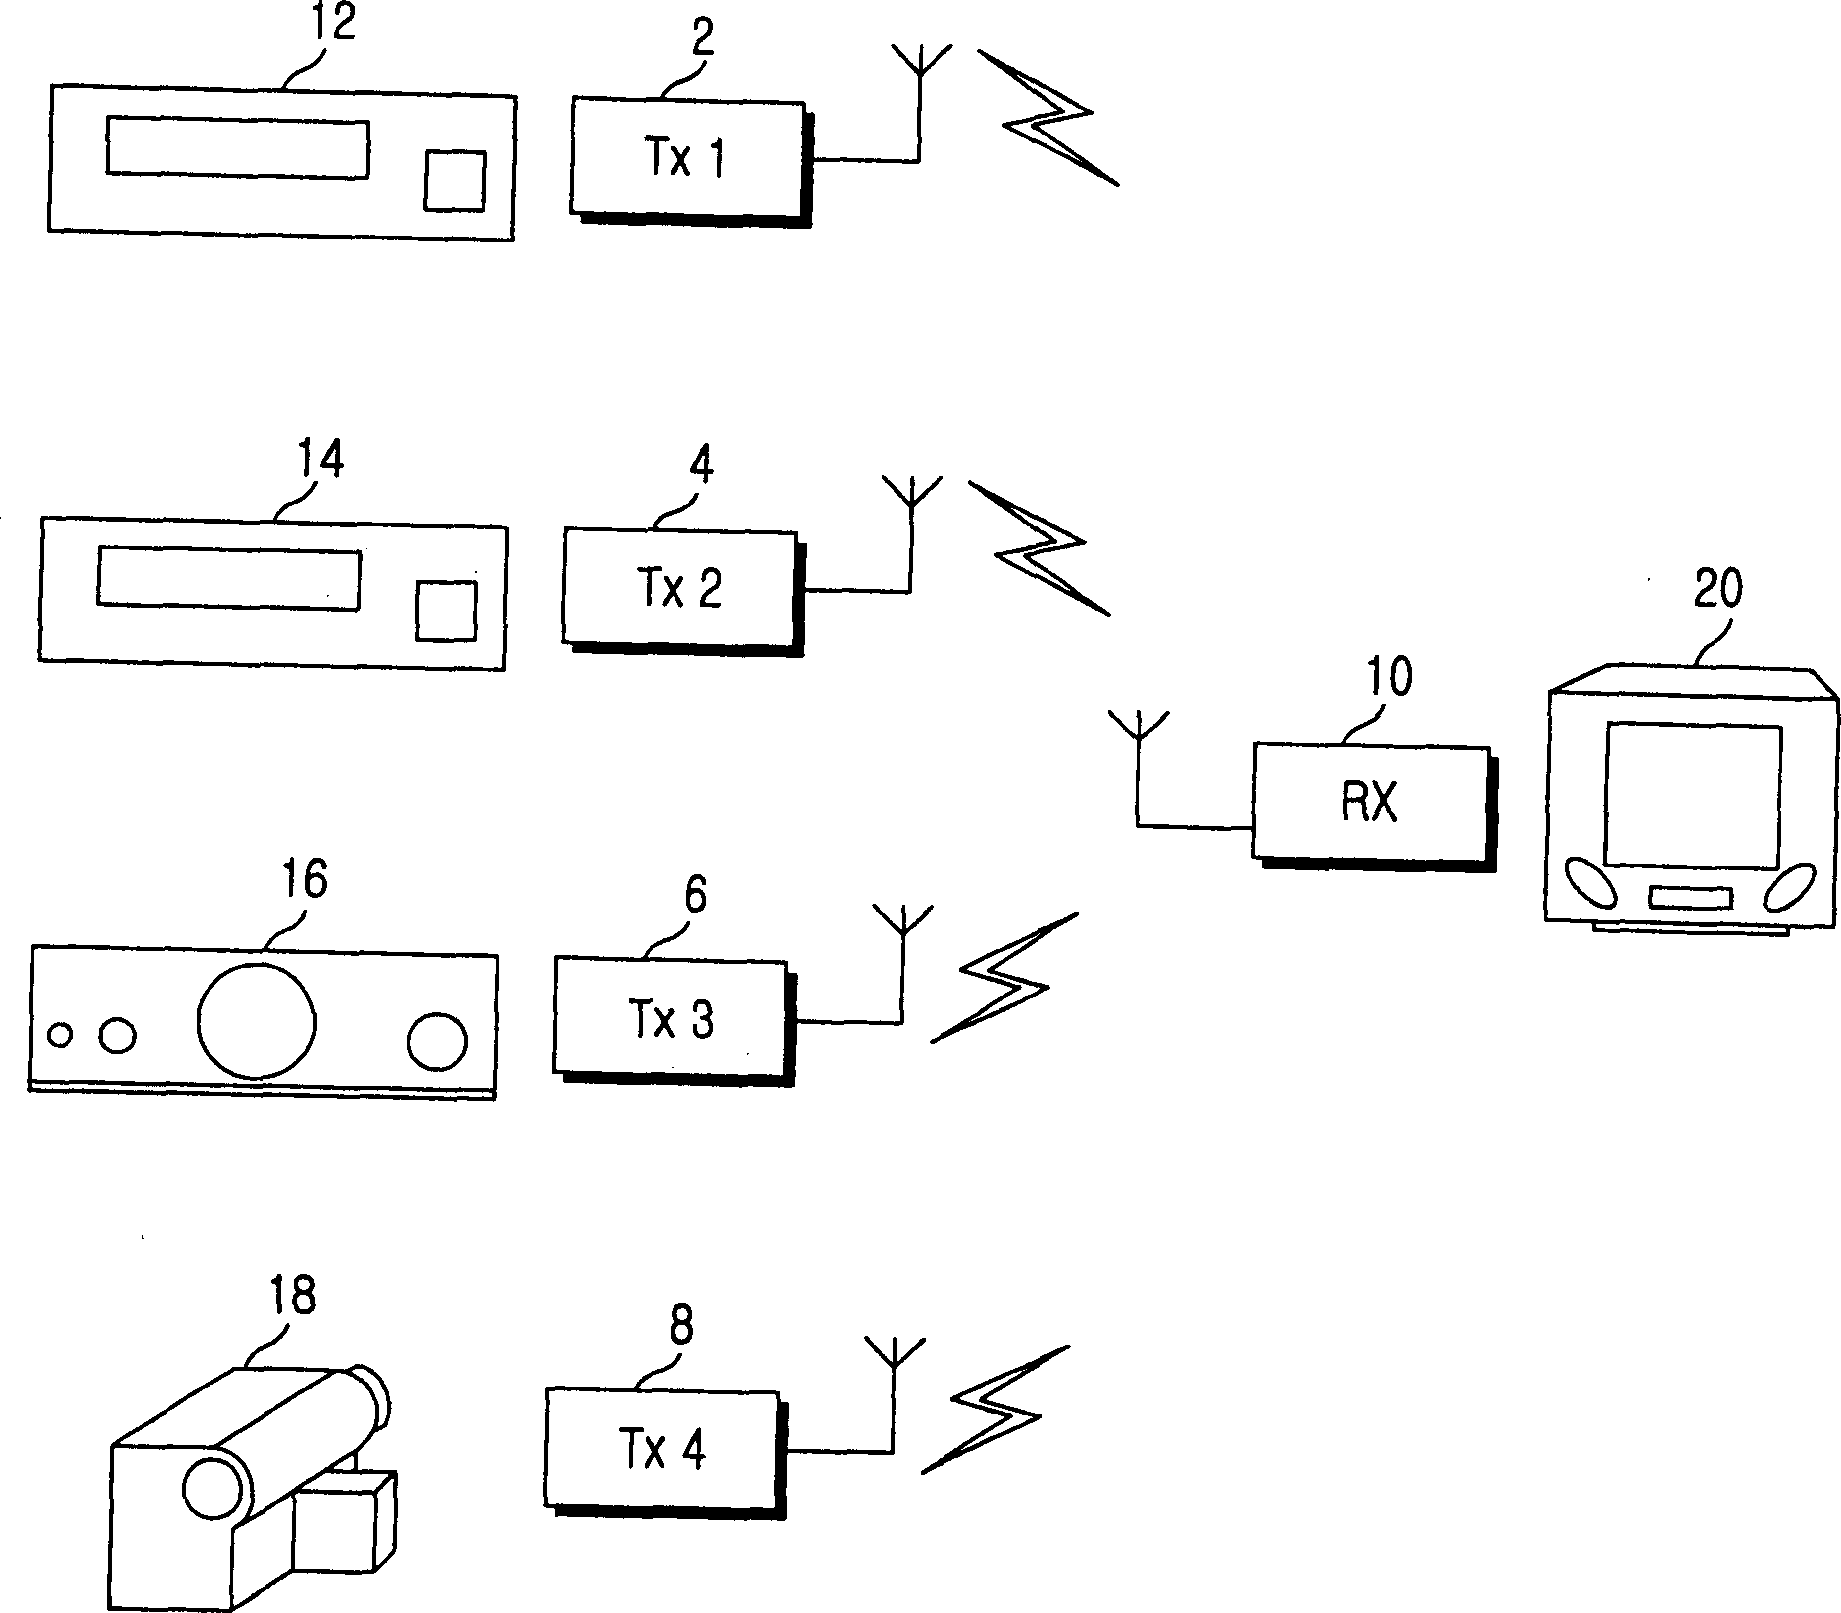 TV set top-box system and method for watching digital broadcasting